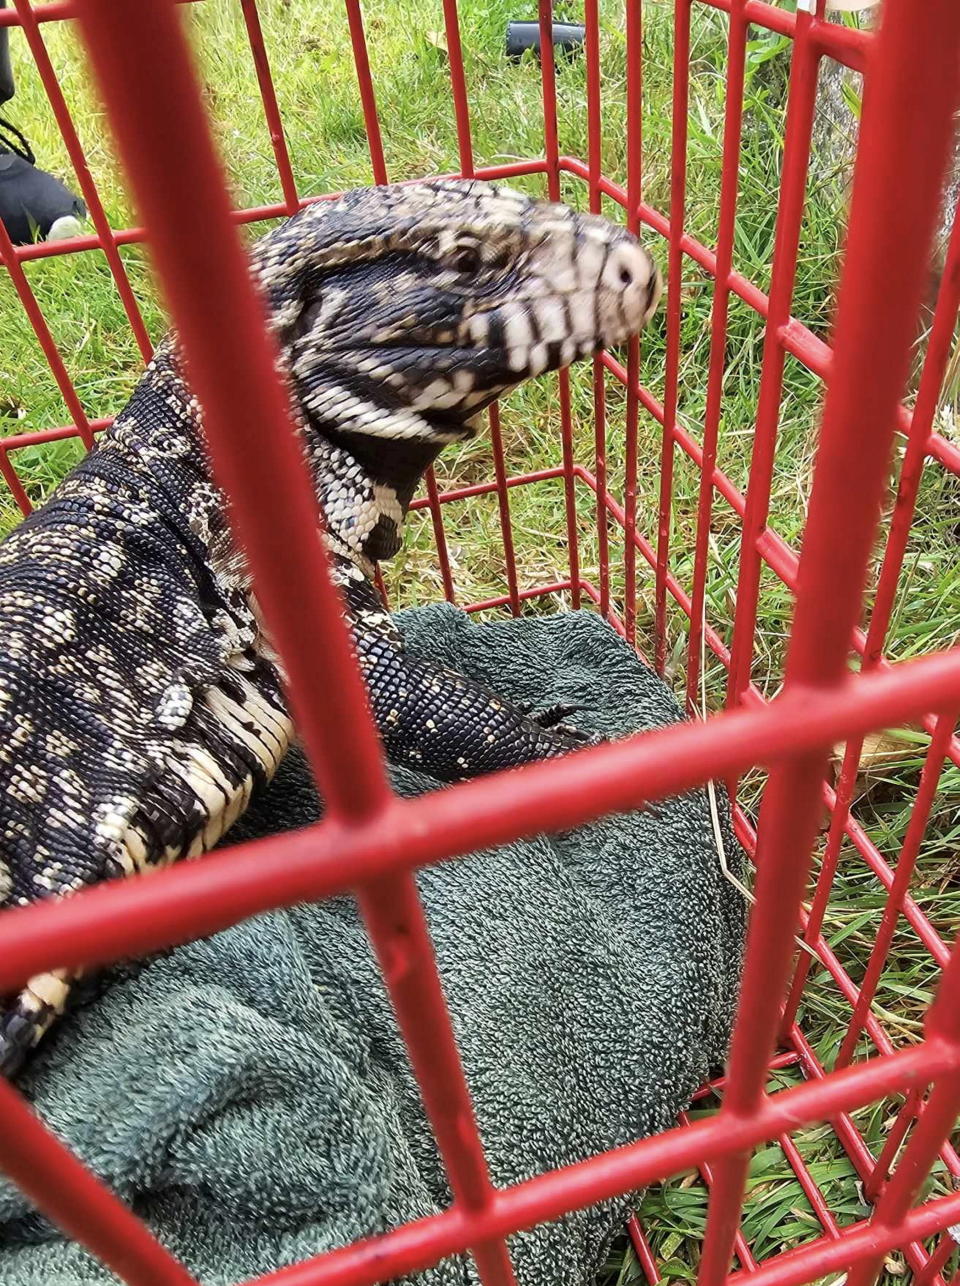 A large lizard that was rescued by the GSPCA in Castel, Guernsey on Friday evening (Aug 11).  See SWNS story SWMRlizard.  Steve Byrne GSPCA Manager said “We are currently trying to find the owner of the extremely large lizard and also trying to identify the exact species, which we believe is a tegu.  It is so big it is currently in a kennel as we don’t a vivarium large enough.  Being nearly 3 feet long it is certainly the largest reptile in our care.” 